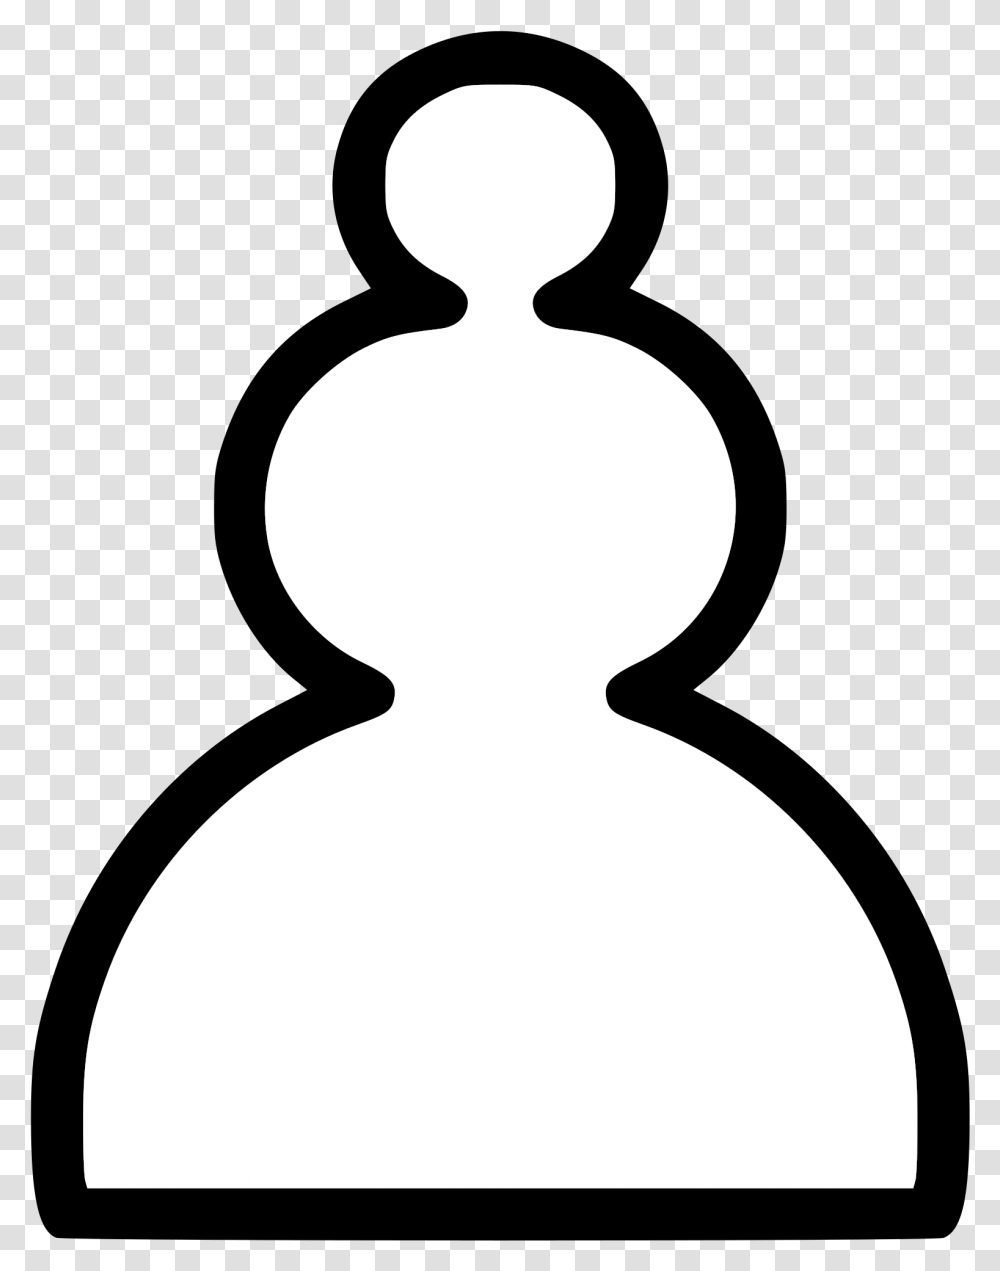 Chess Rook Meeple White Game Thinking Strategy Chess Pawn, Silhouette, Snowman, Winter, Outdoors Transparent Png